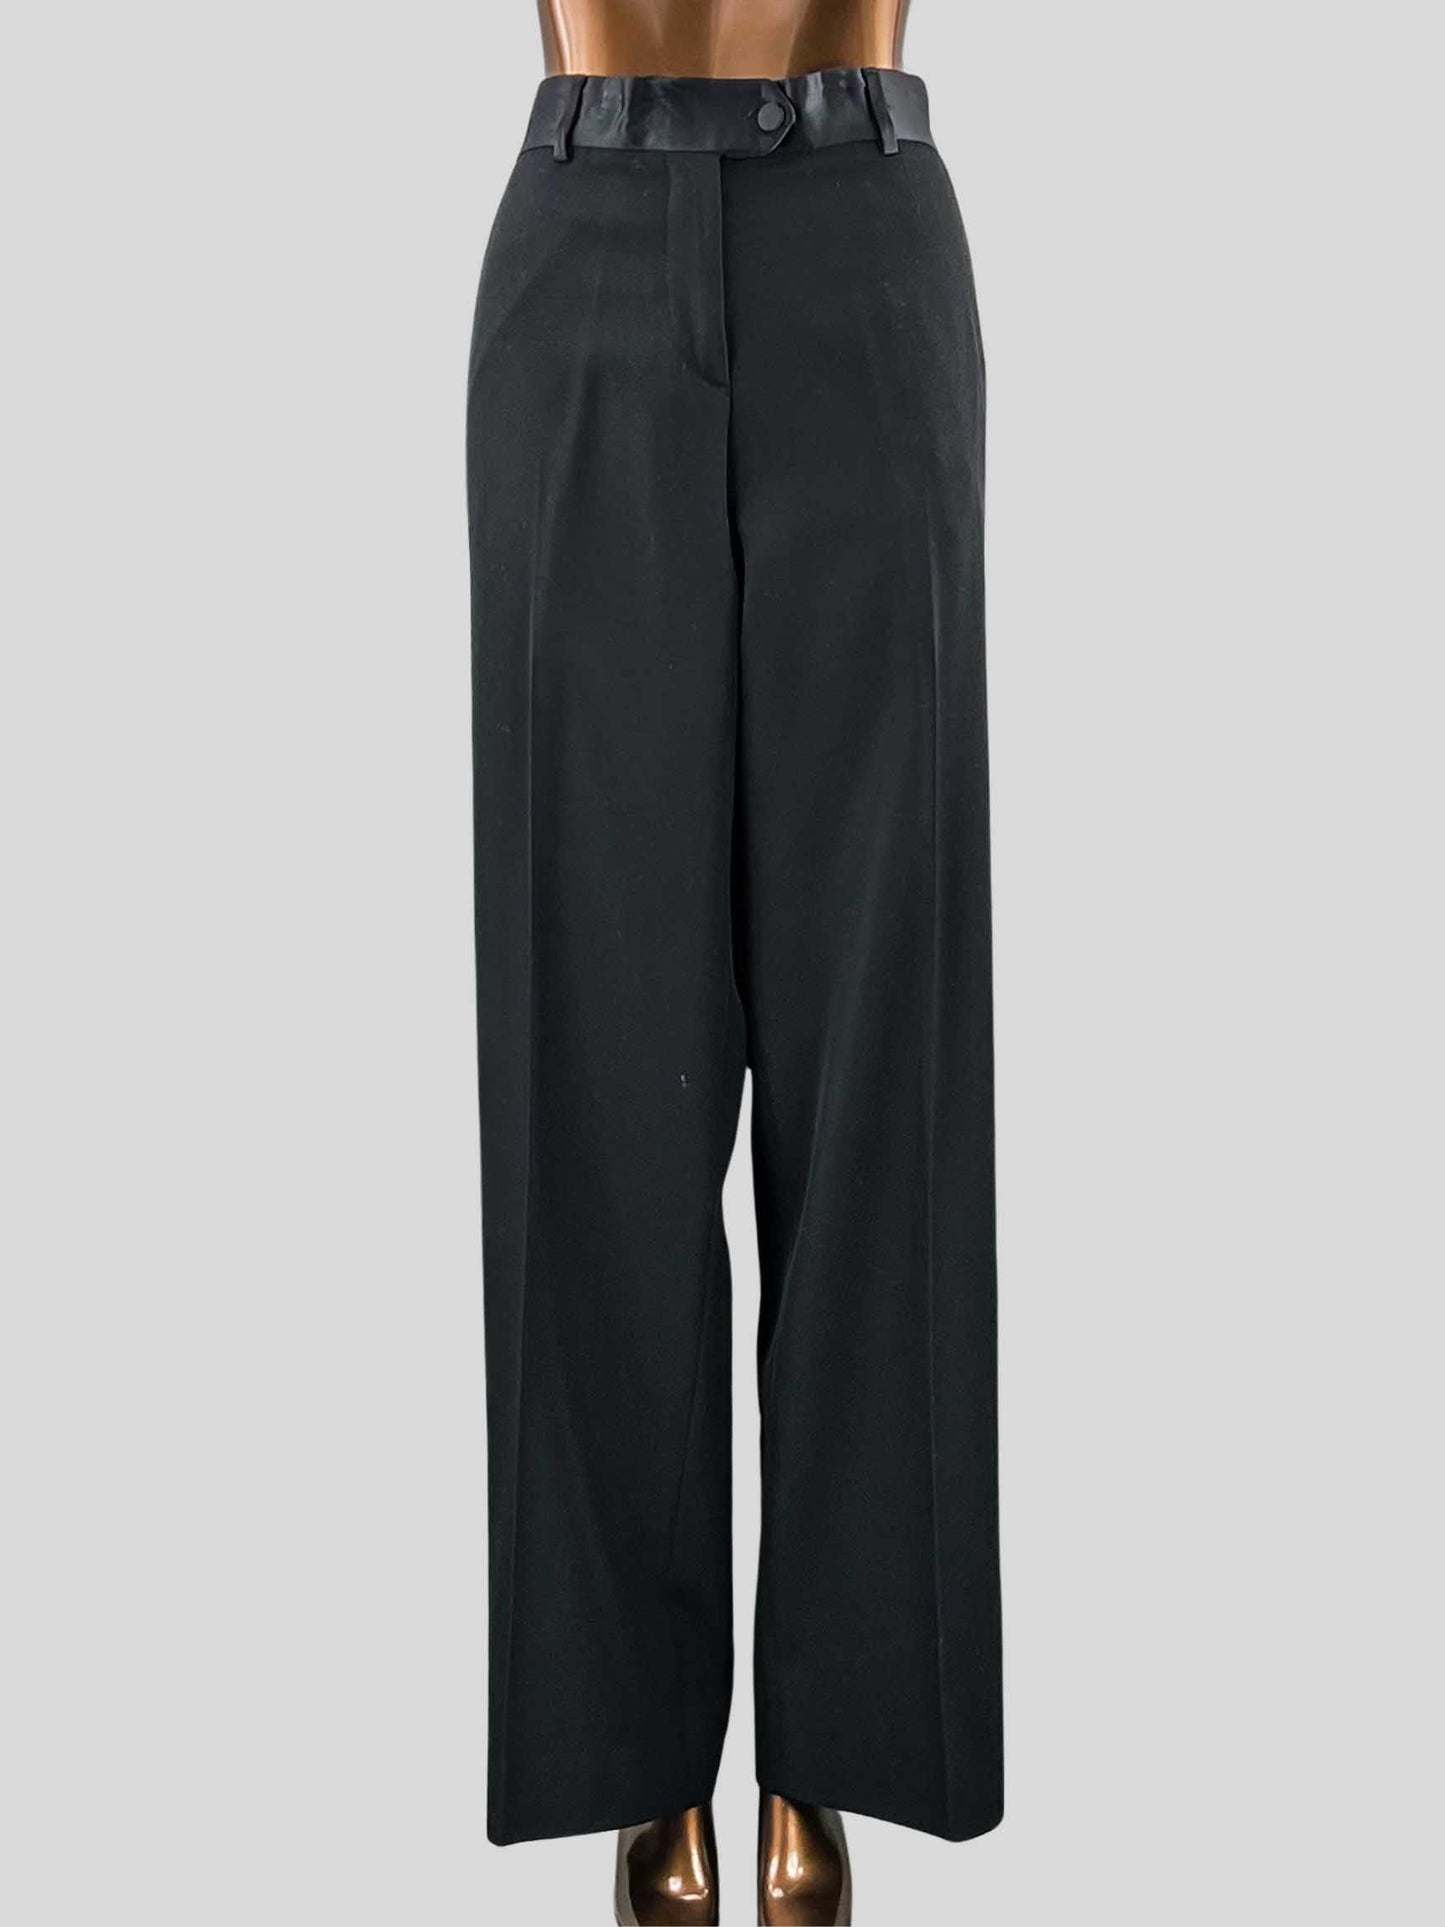 PAUL SMITH Parallel Leg Tuxedo Wool Trousers With Satin Details Size 44 IT